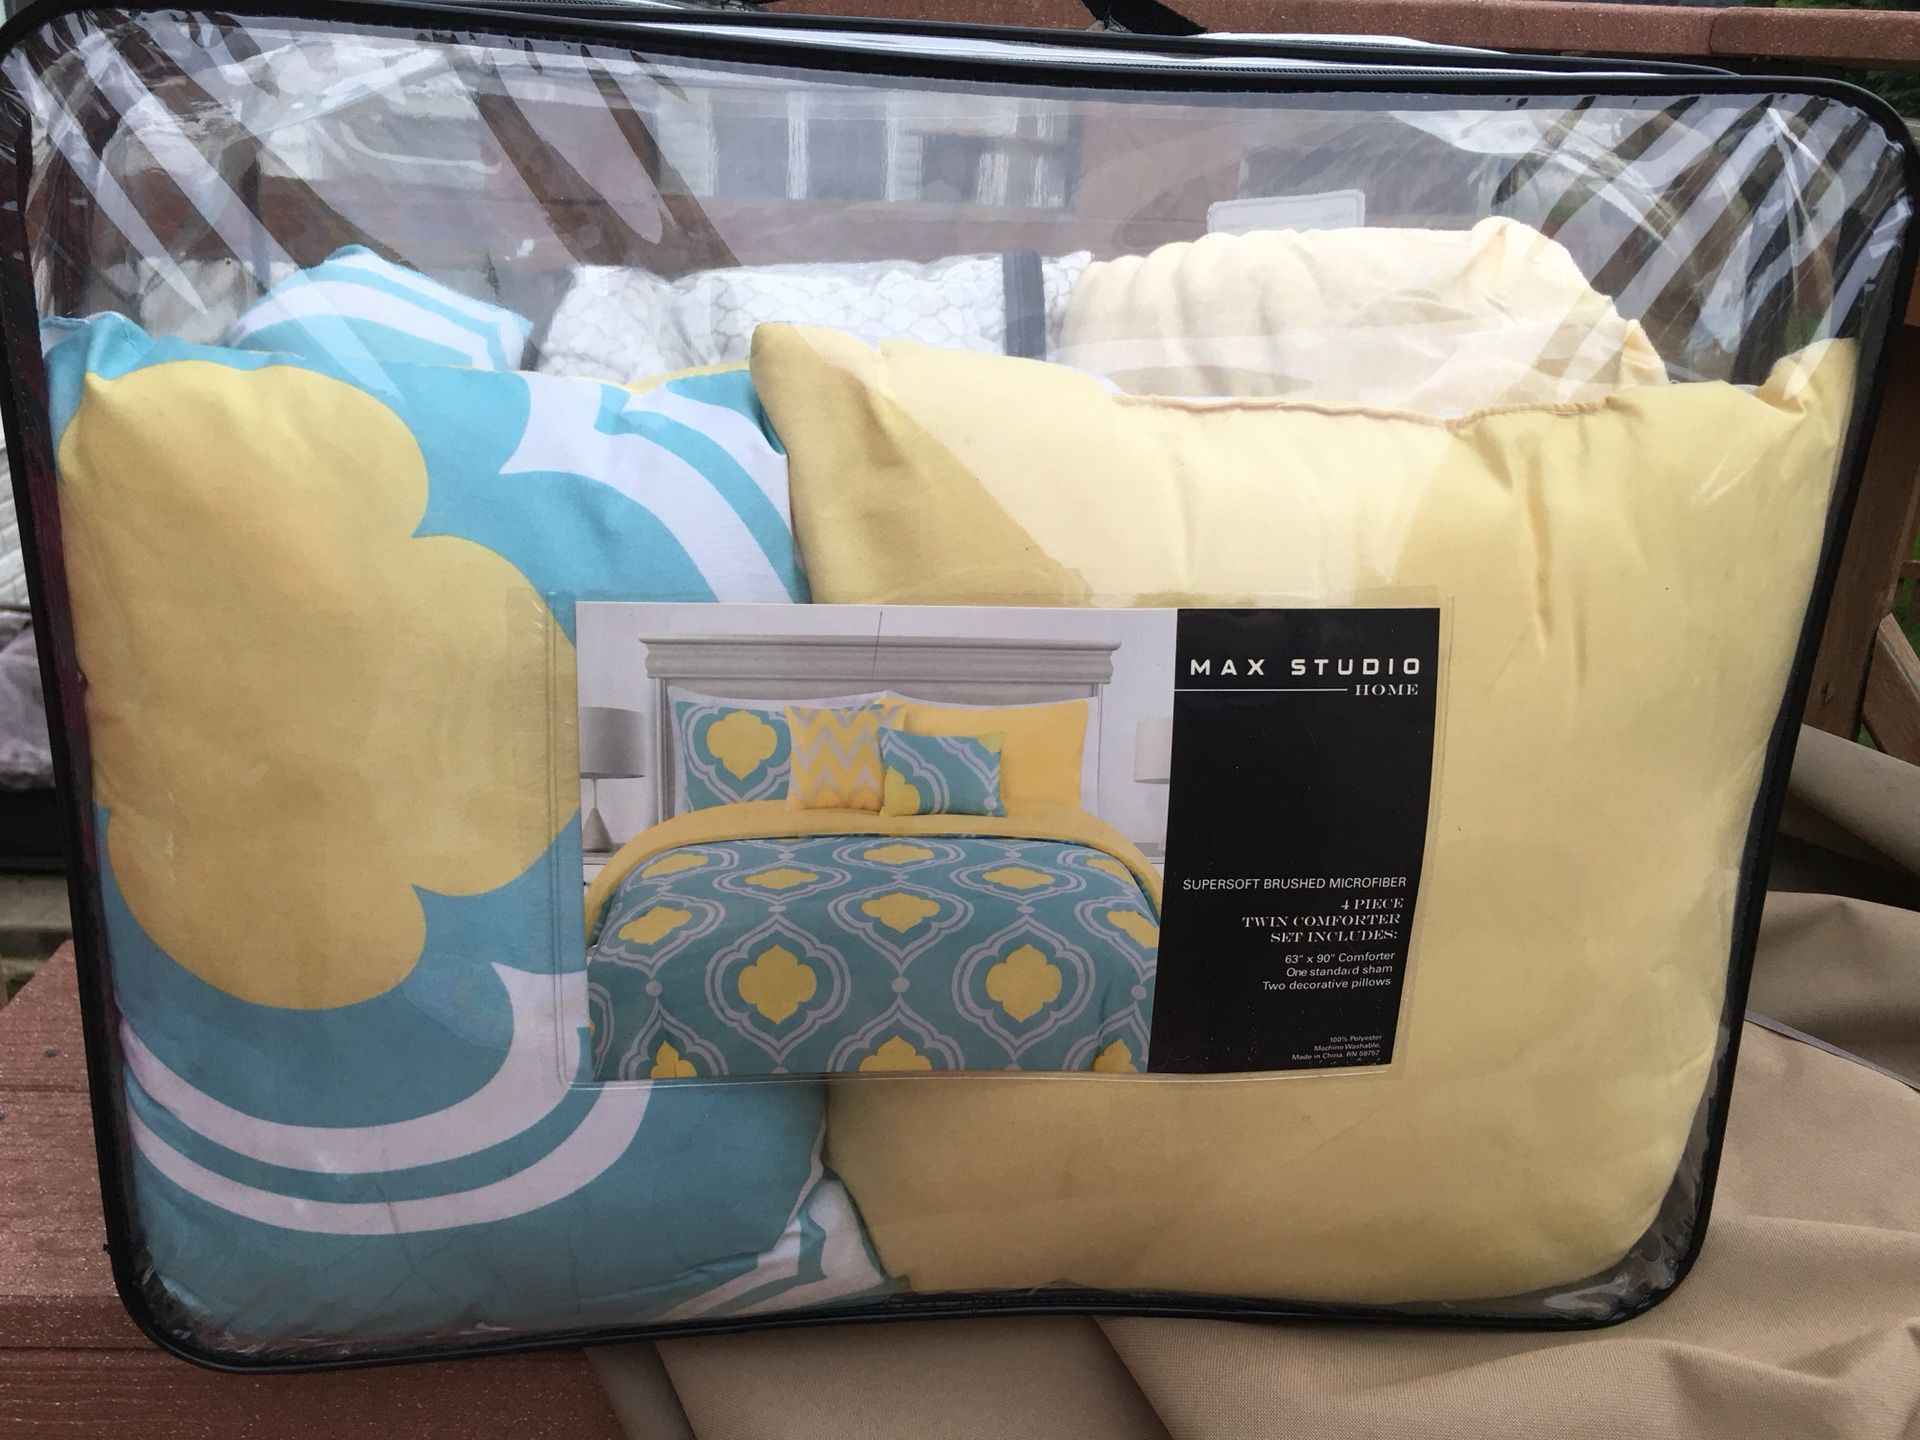 Twin Comforter set, pillow shams, decorative pillows and 2 sets of twin sheets